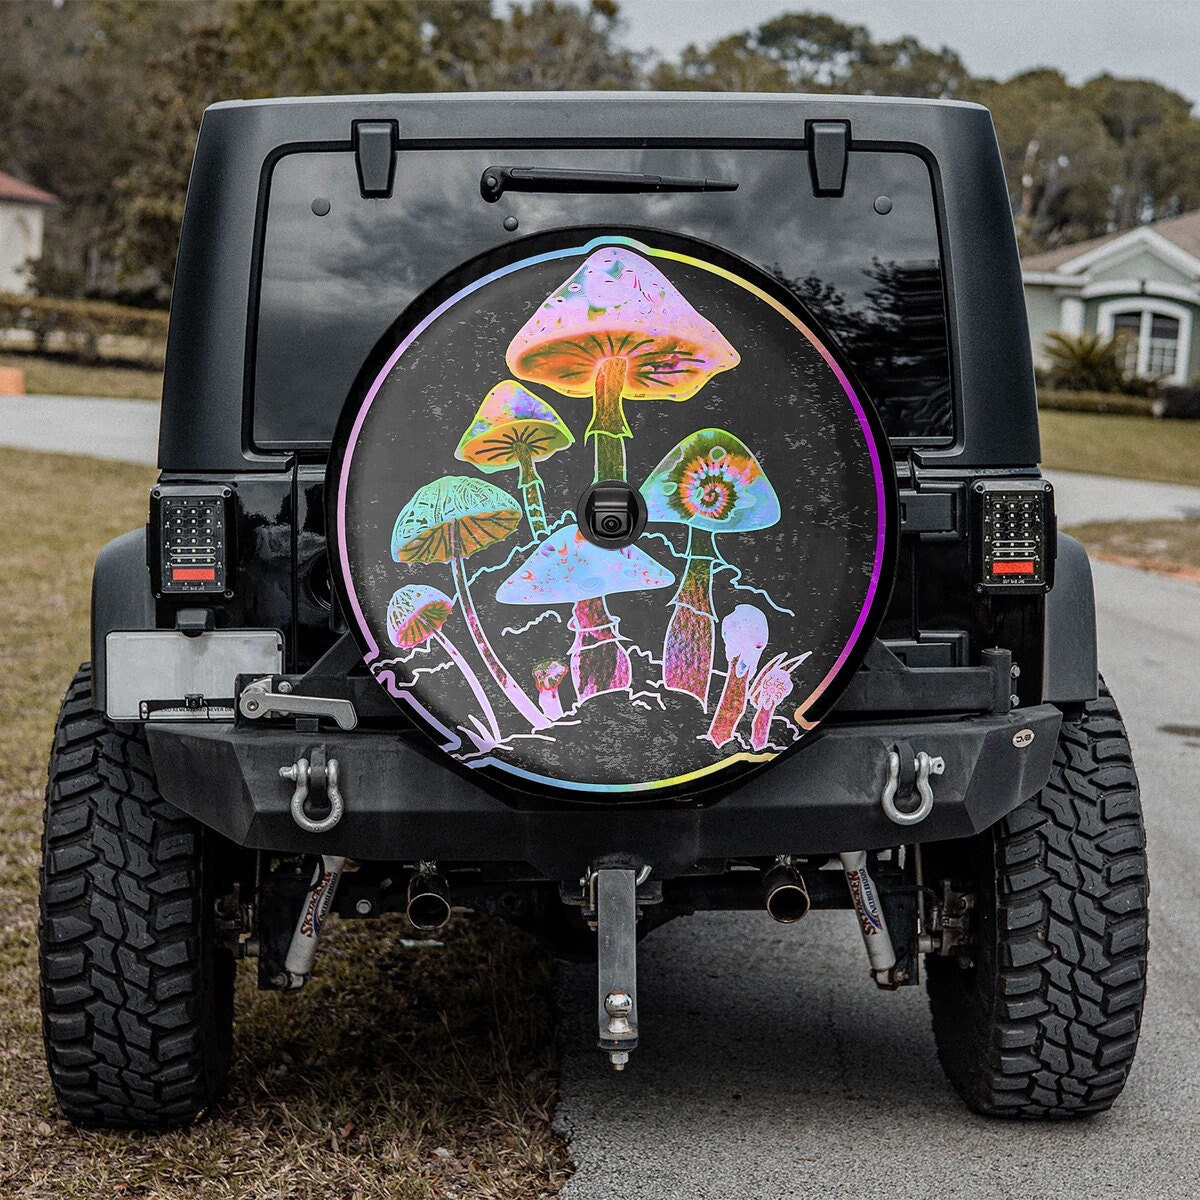 Discover Garden of Shrooms Spare Tire Cover, Psychology Mushroom Tire Cover